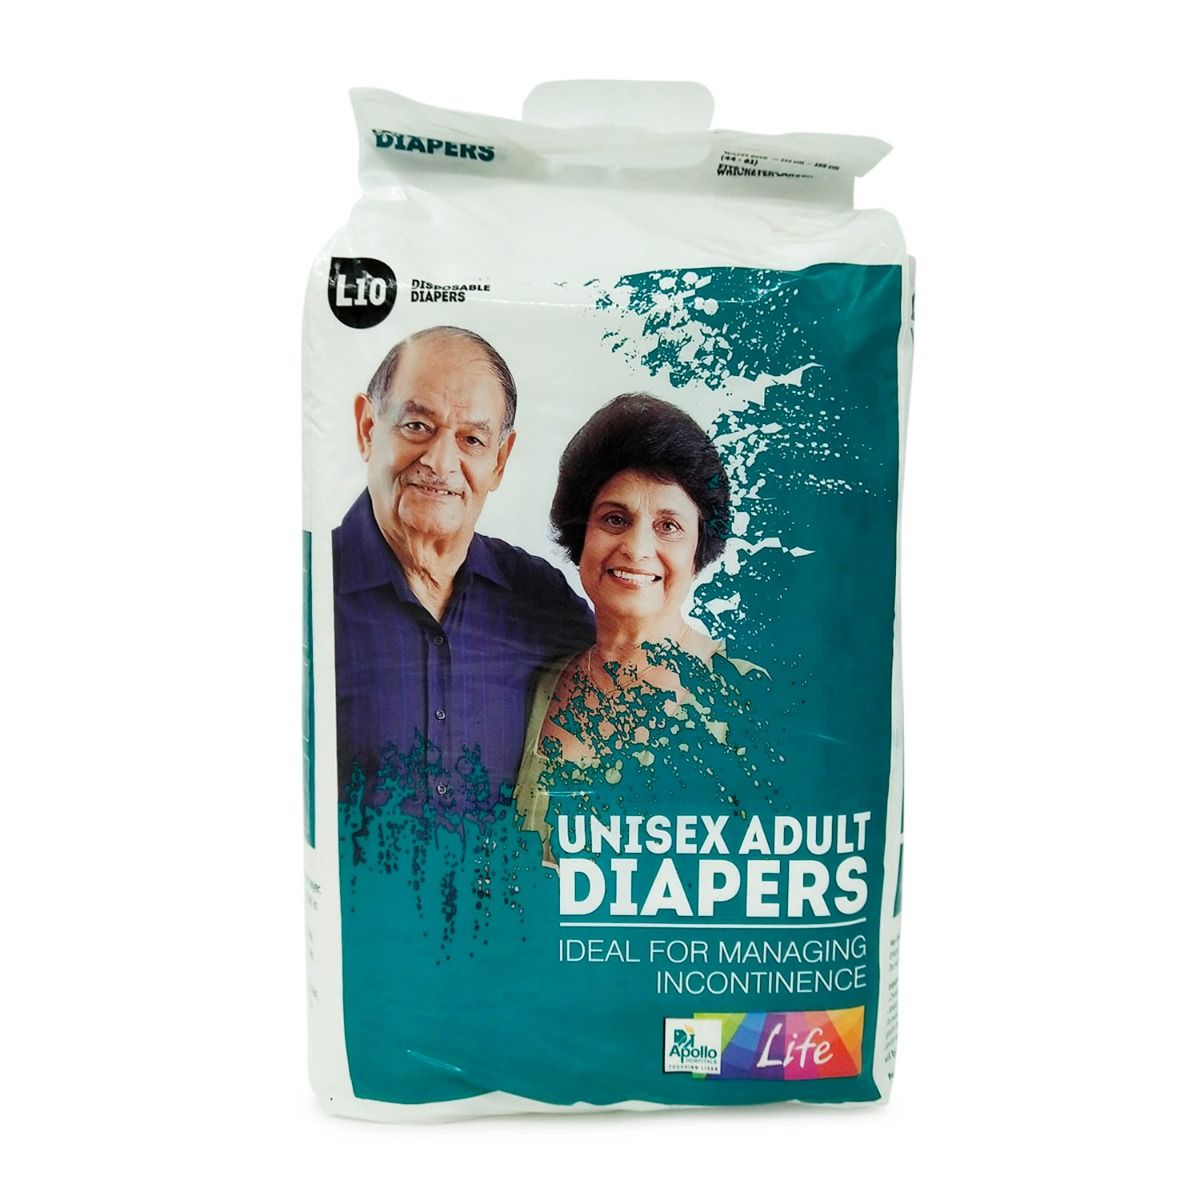 Apollo Life Unisex Adult Diapers Large, 10 Count, Pack of 1 